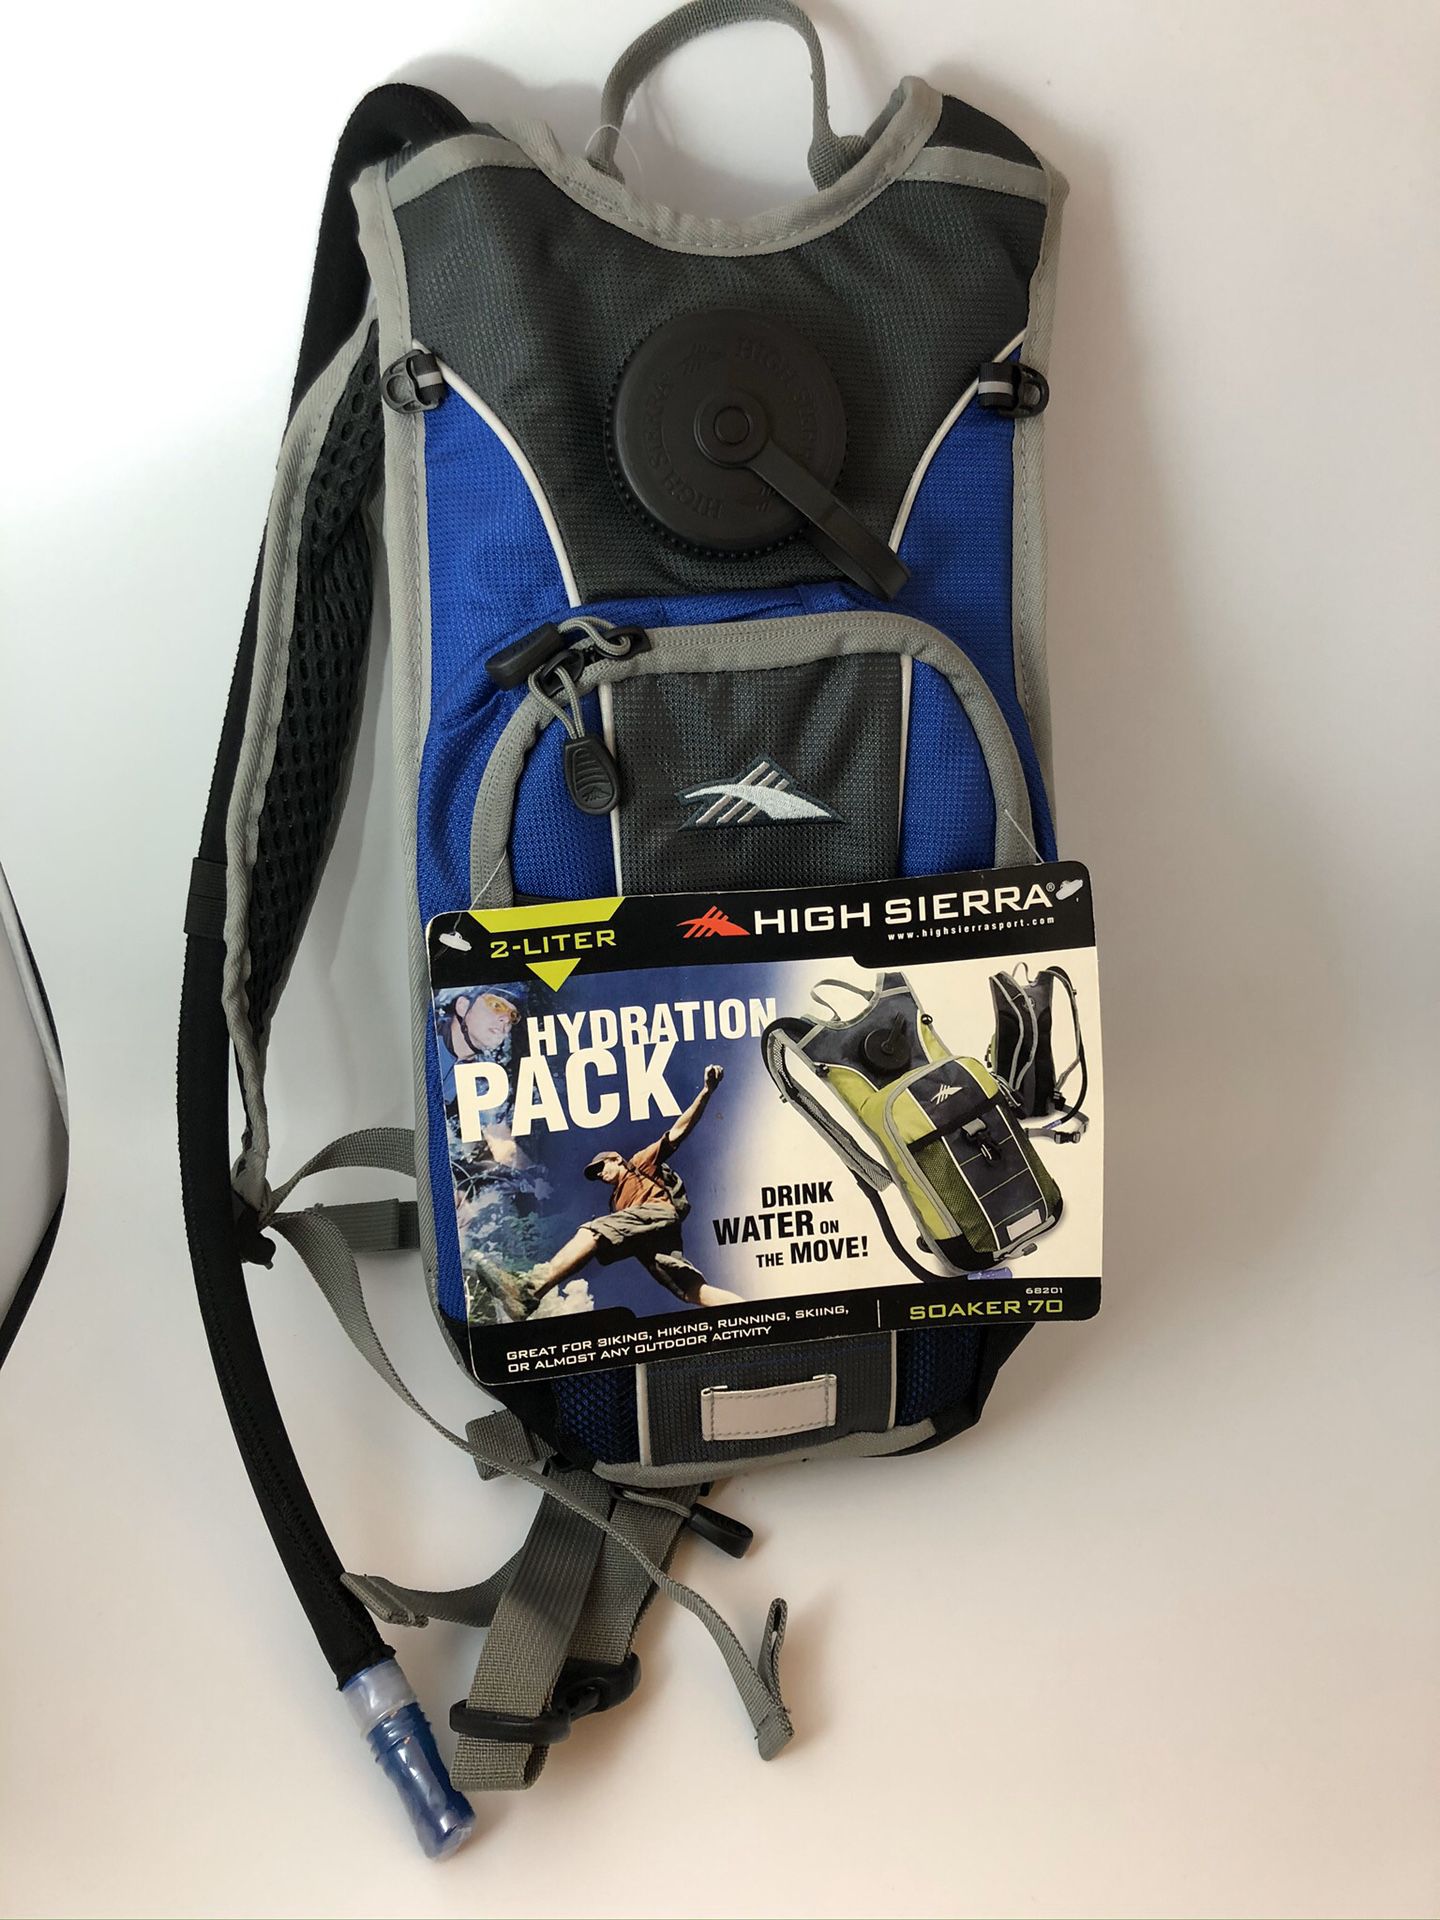 New Hydration BackPack